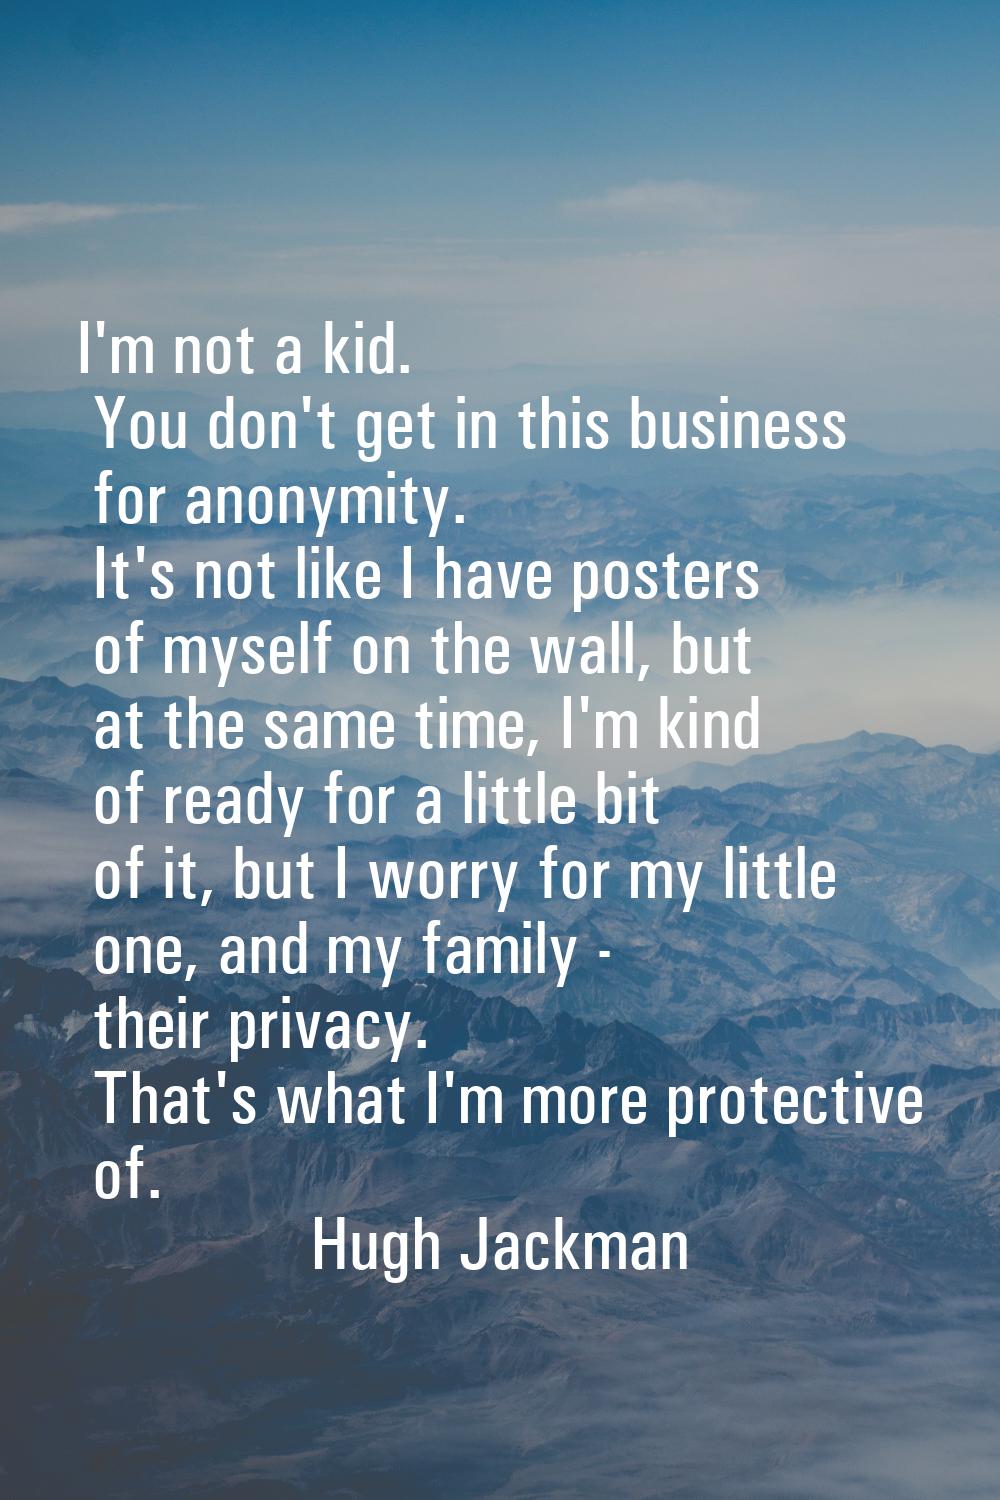 I'm not a kid. You don't get in this business for anonymity. It's not like I have posters of myself